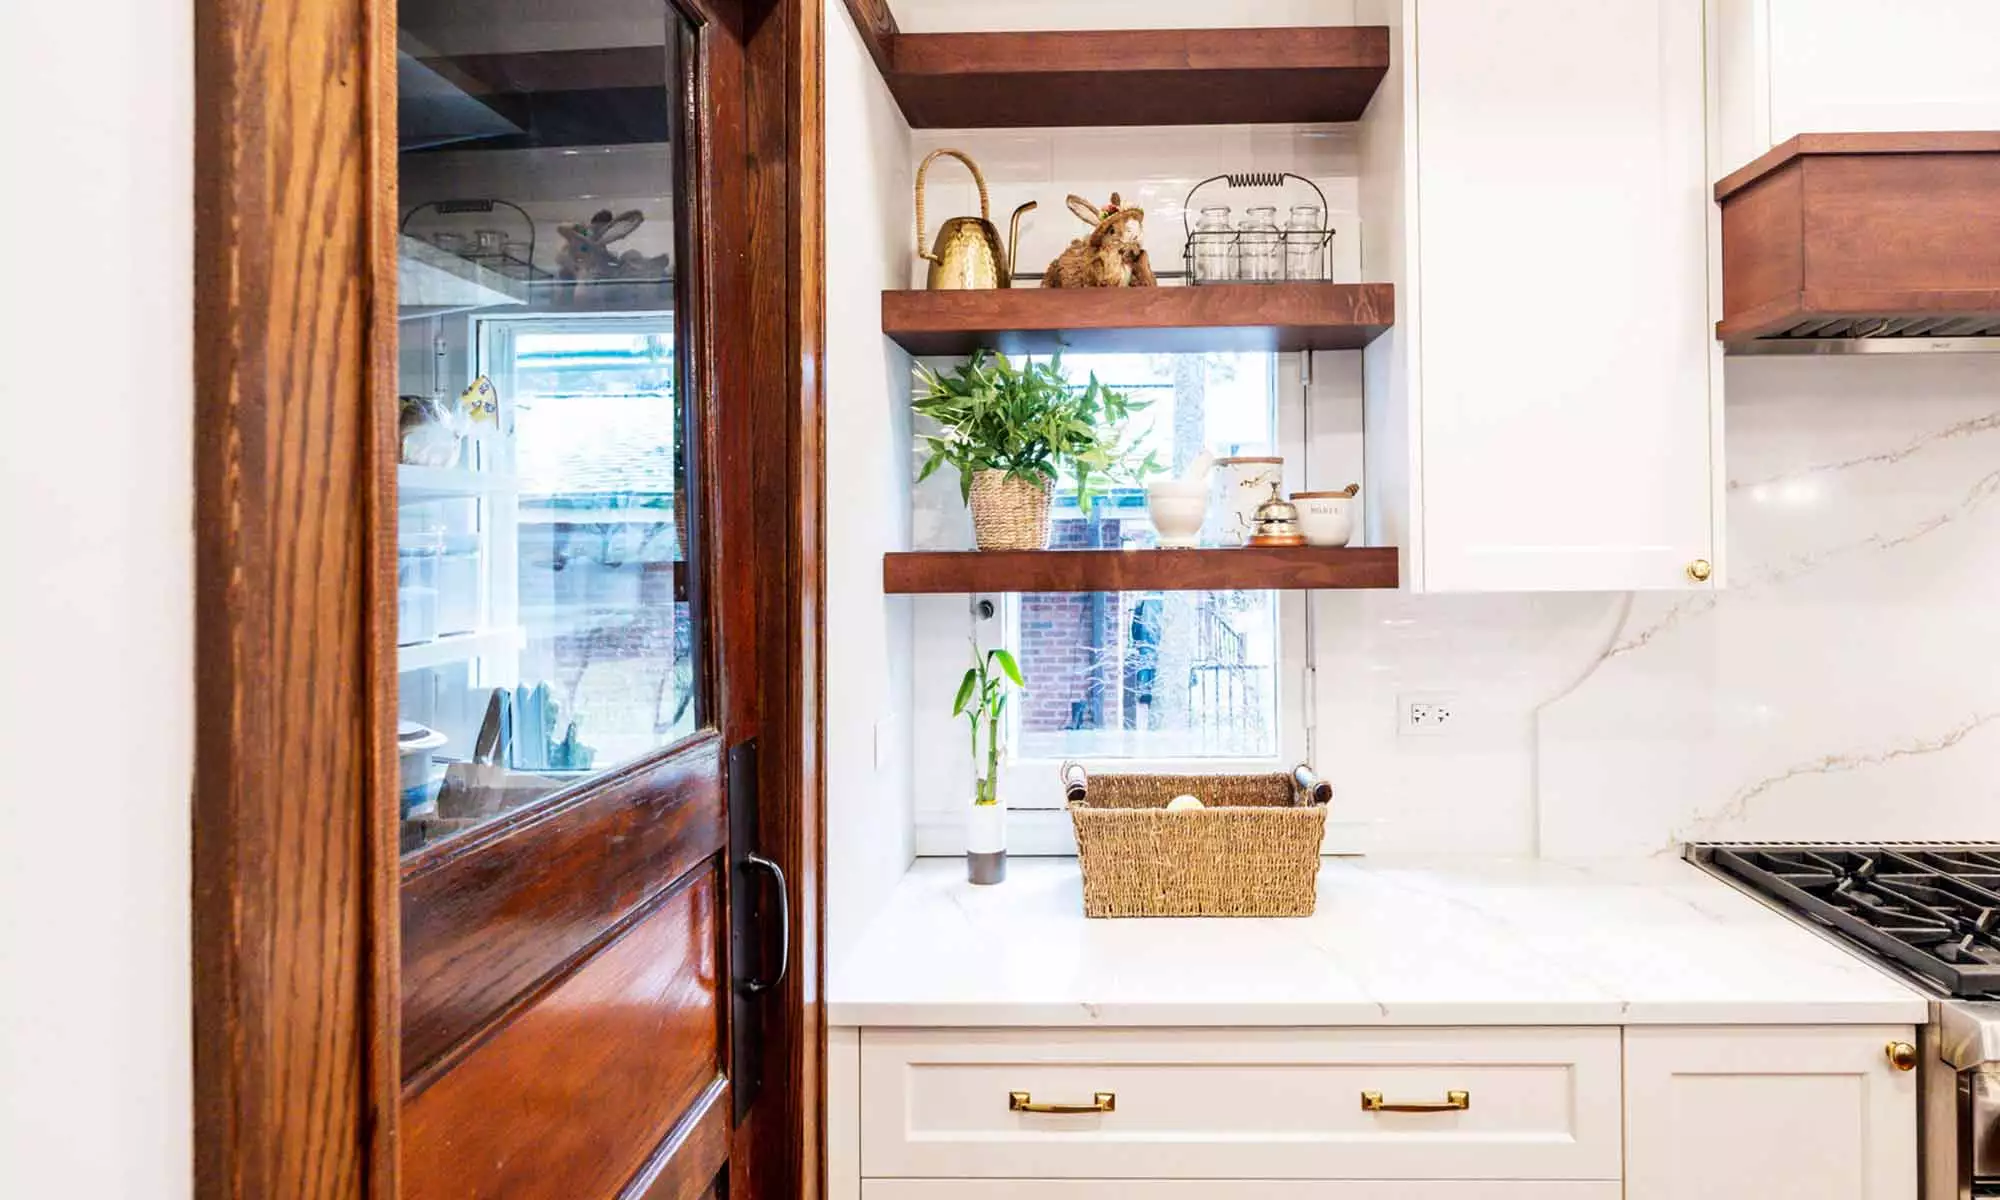 interior view of vintage pantry door and open shelves